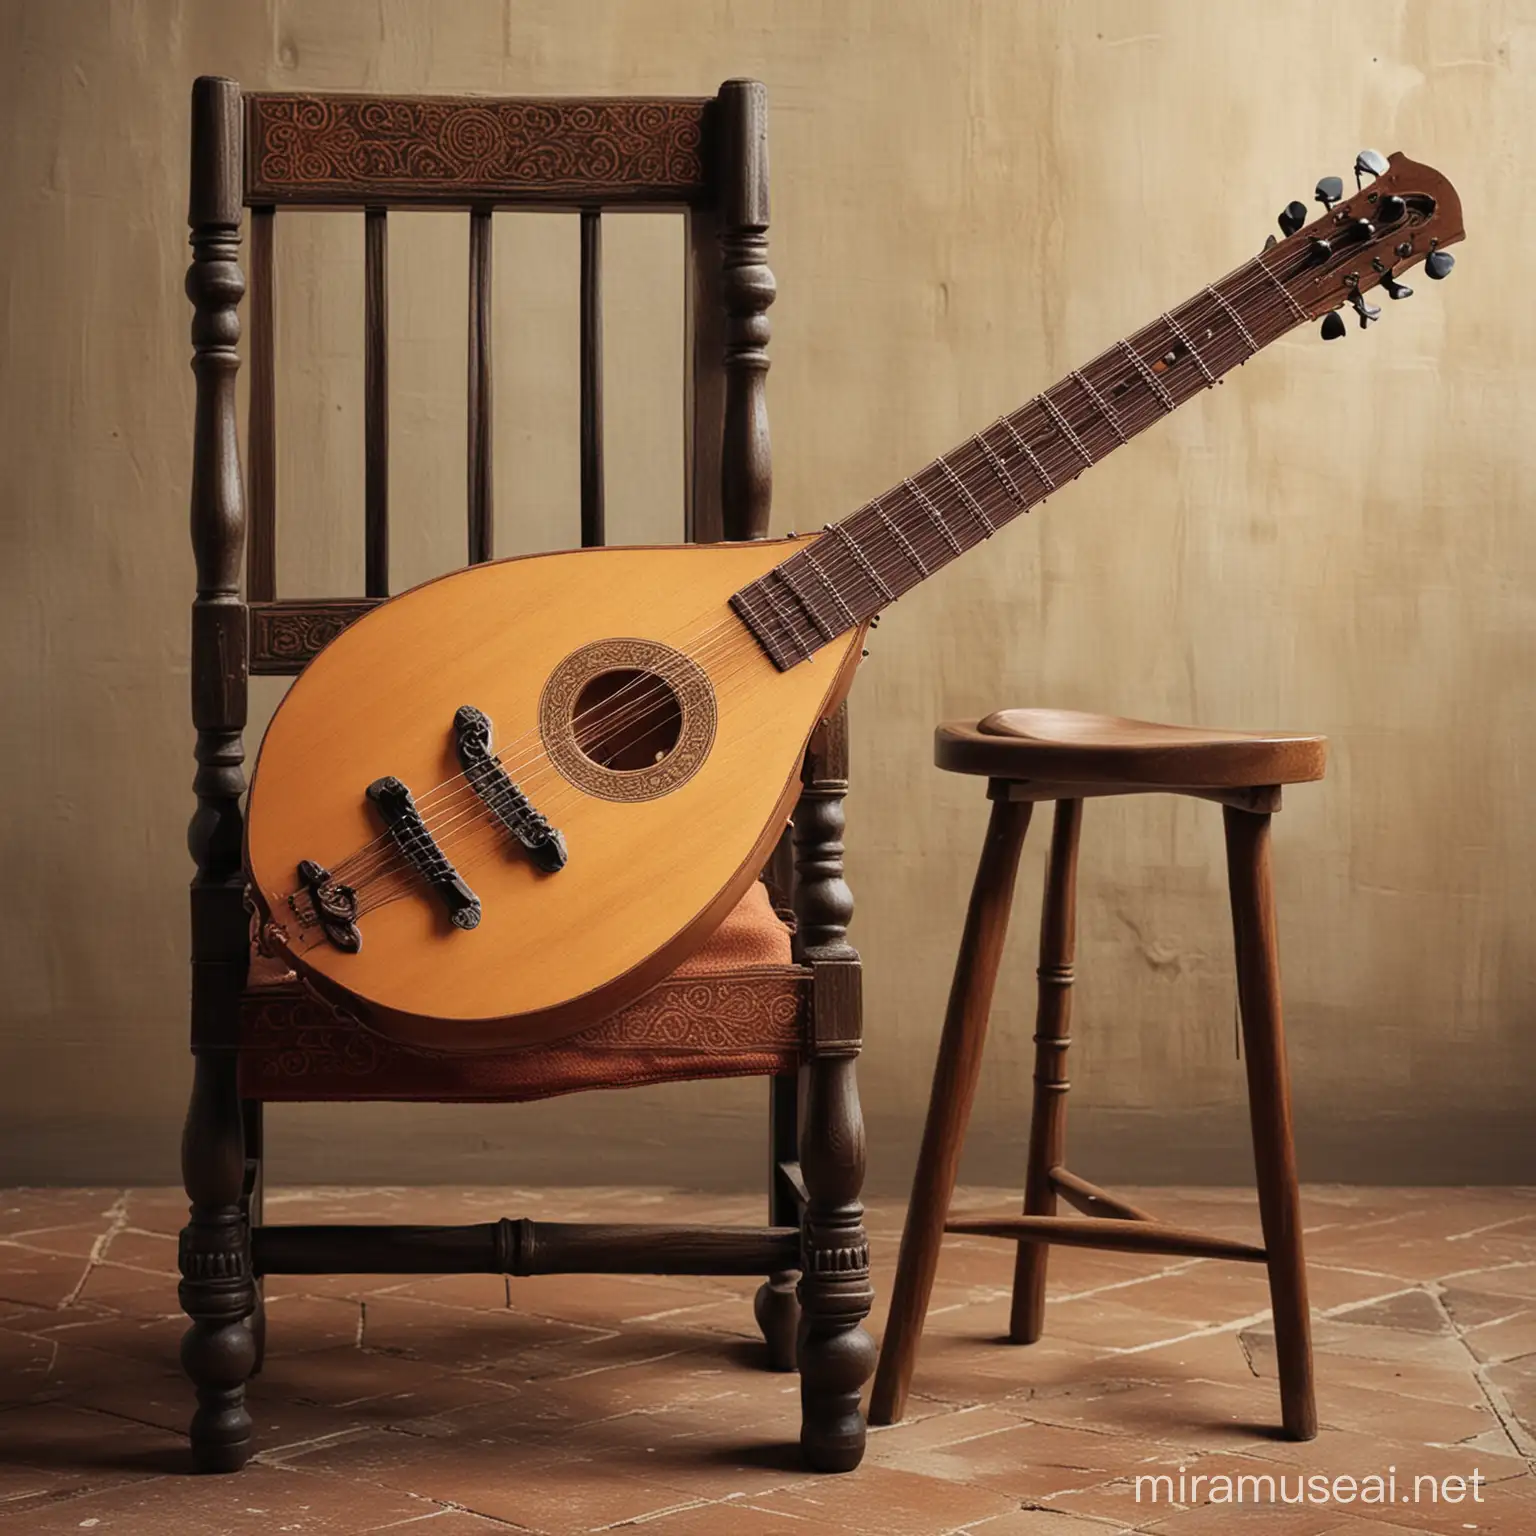 Medieval Lute on Vintage Chair with Intricate Carvings